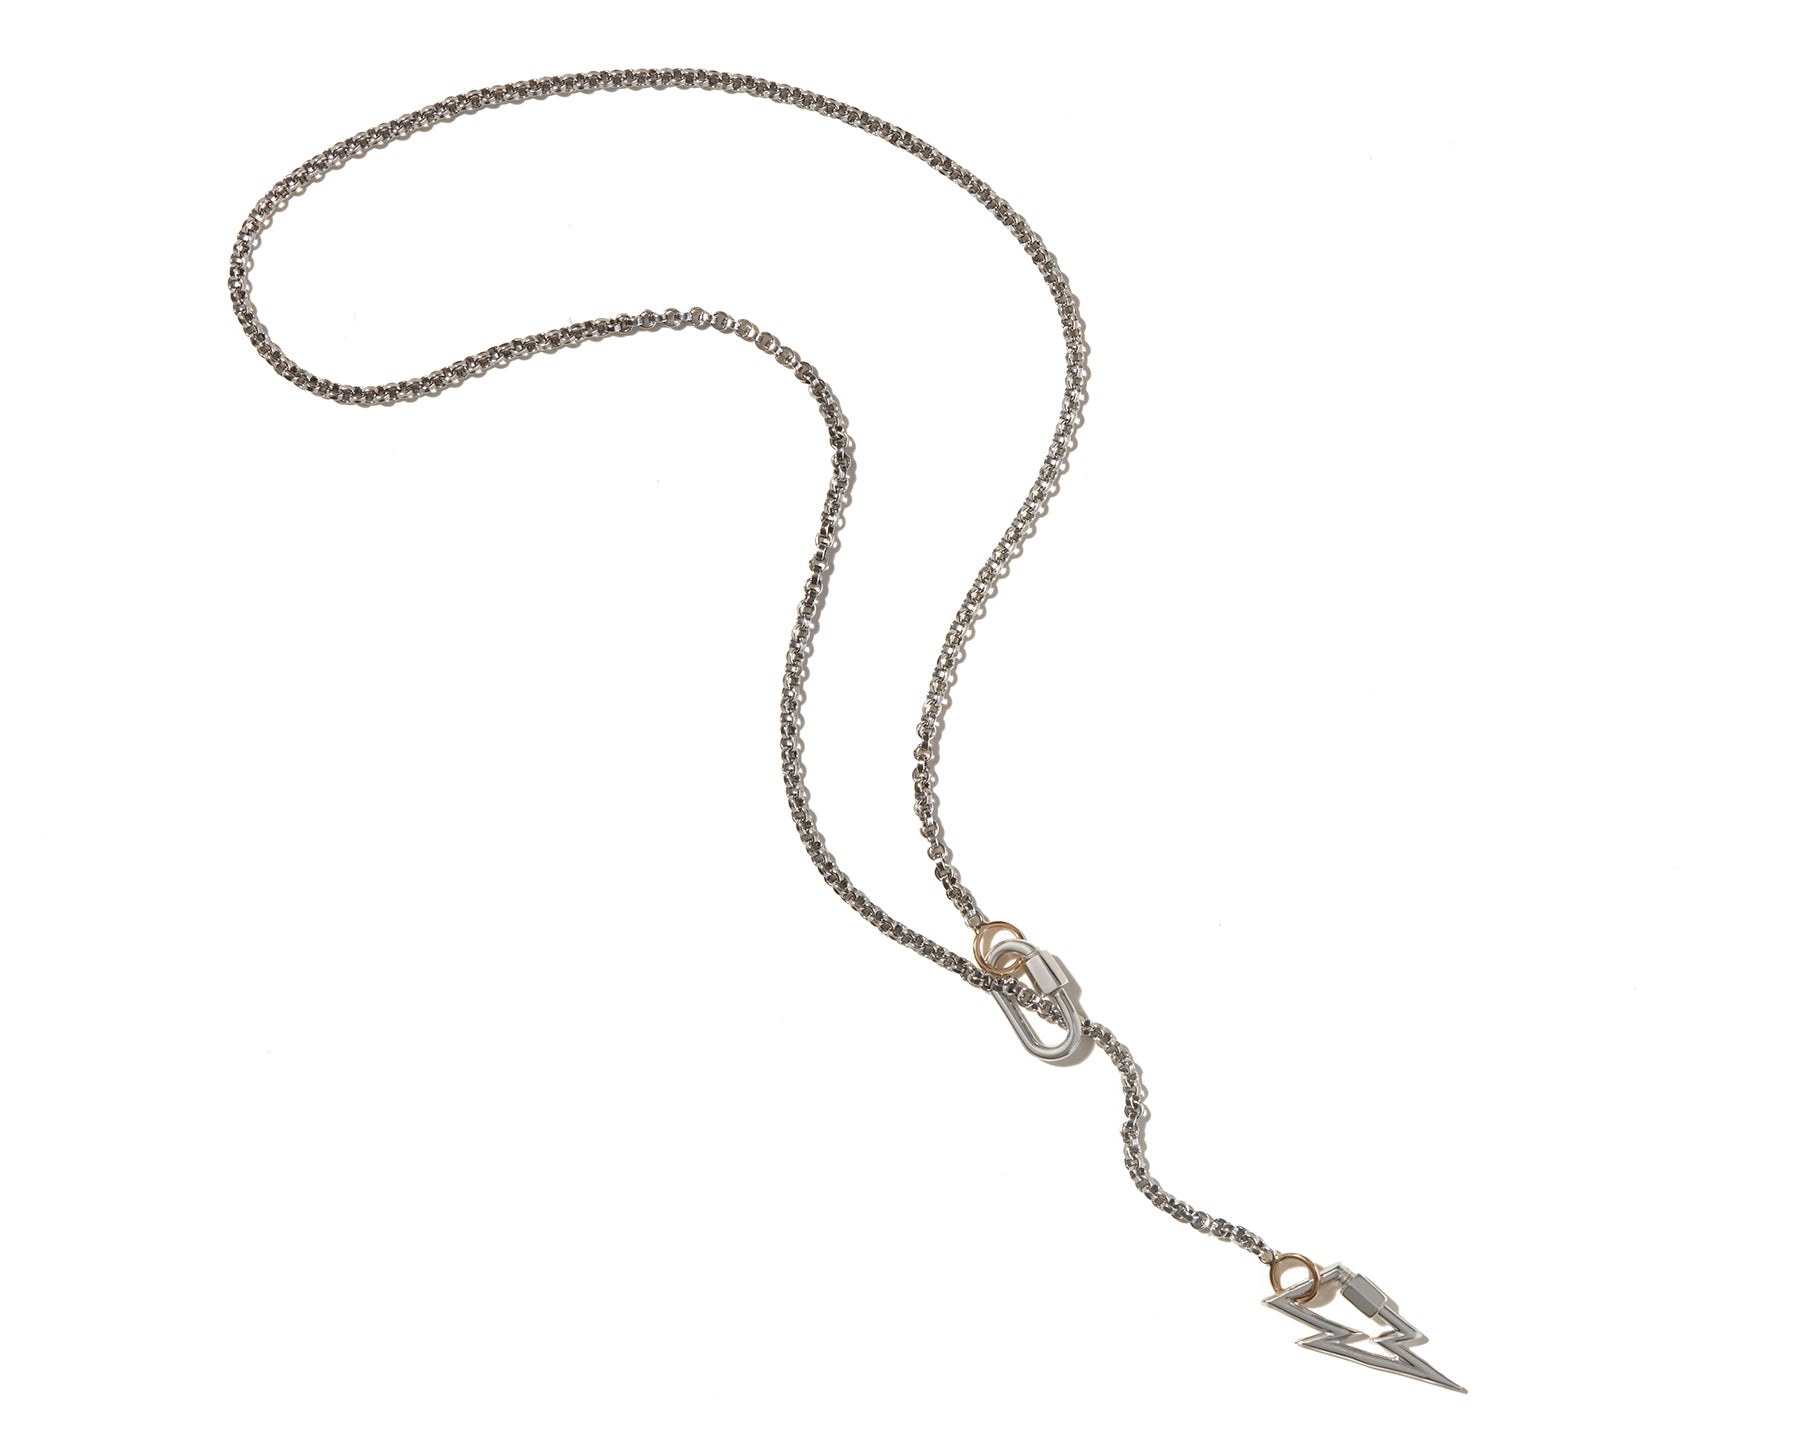 Silver lightning bolt pendant attached to long necklace chain against white backdrop